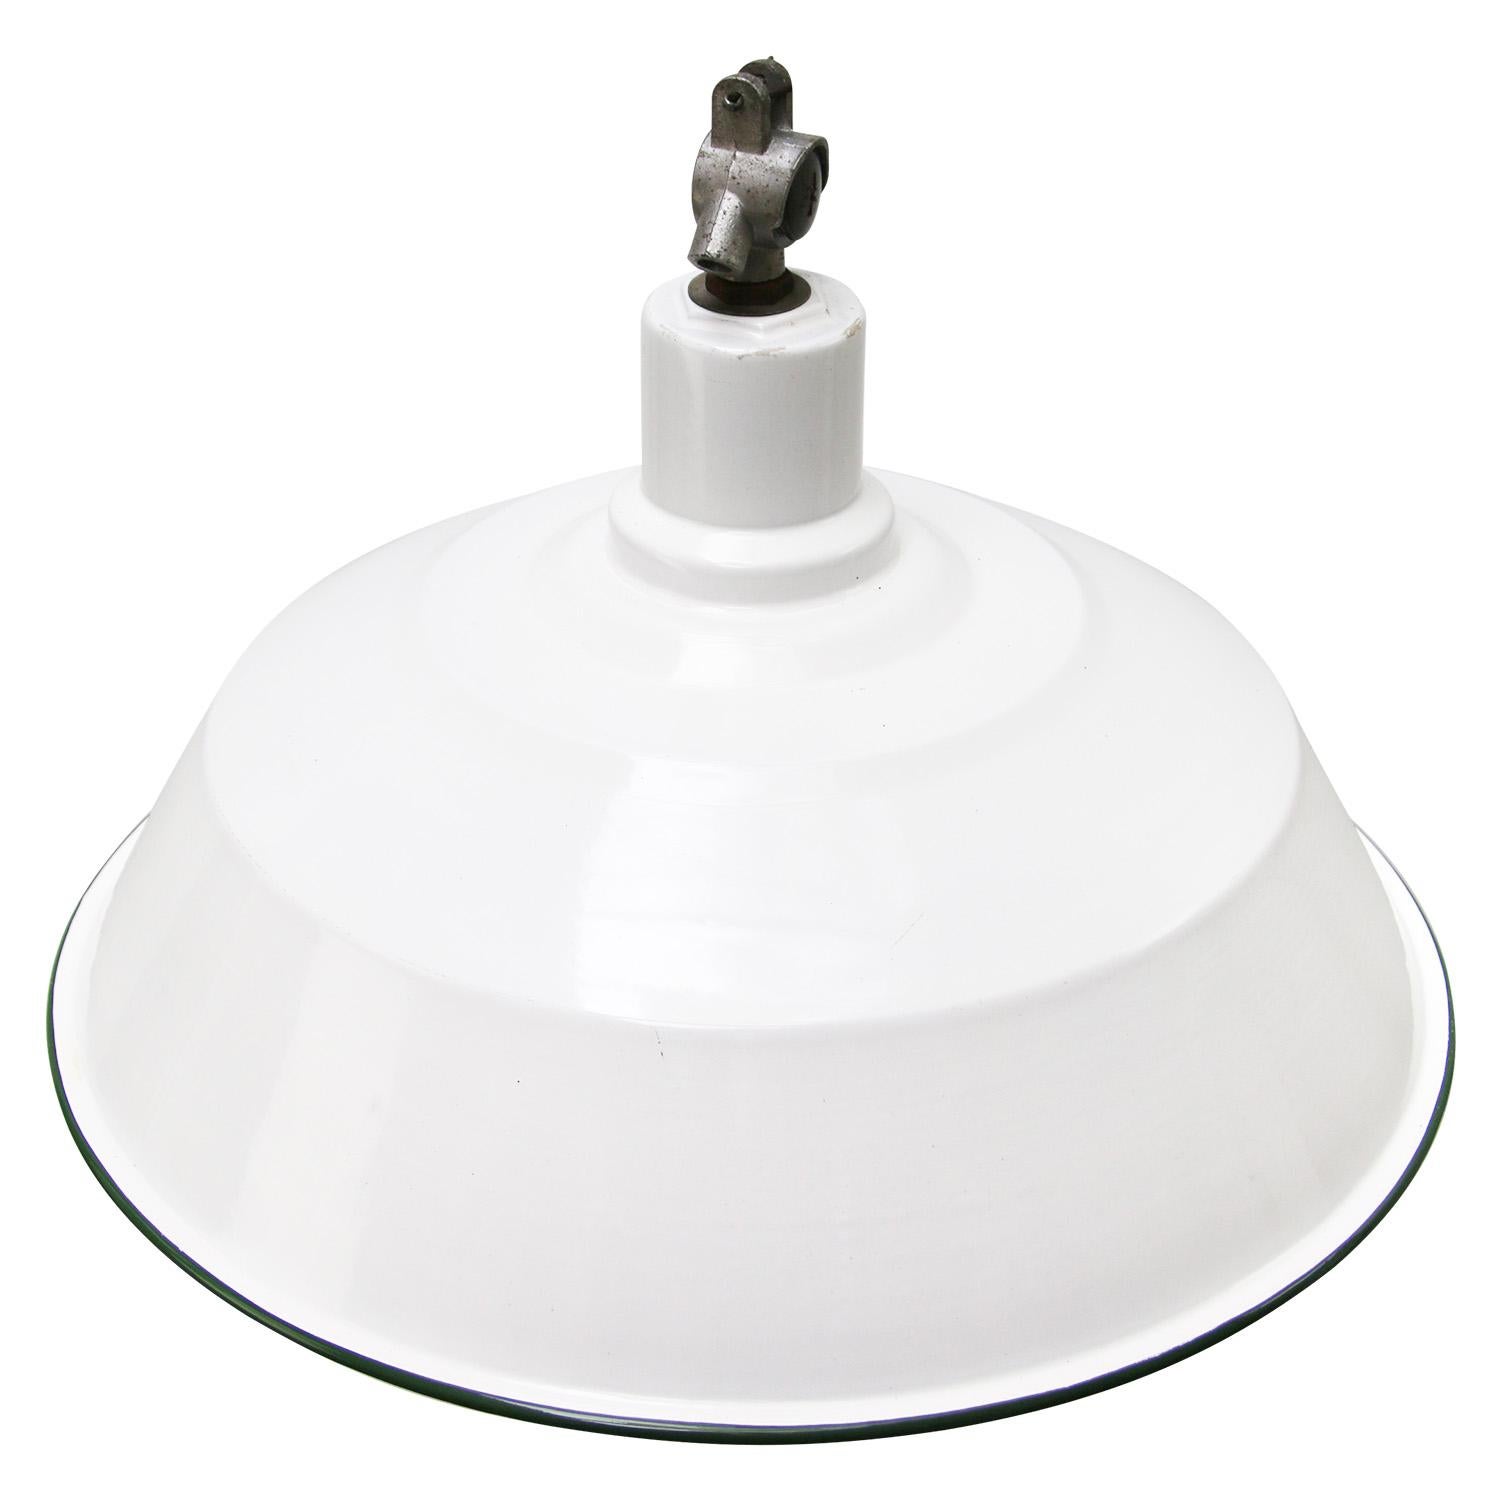 American industrial factory pendant light by Benjamin USA
White enamel, white interior.
Metal top

Weight 3.10 kg / 6.8 lb

Priced per individual item. All lamps have been made suitable by international standards for incandescent light bulbs,